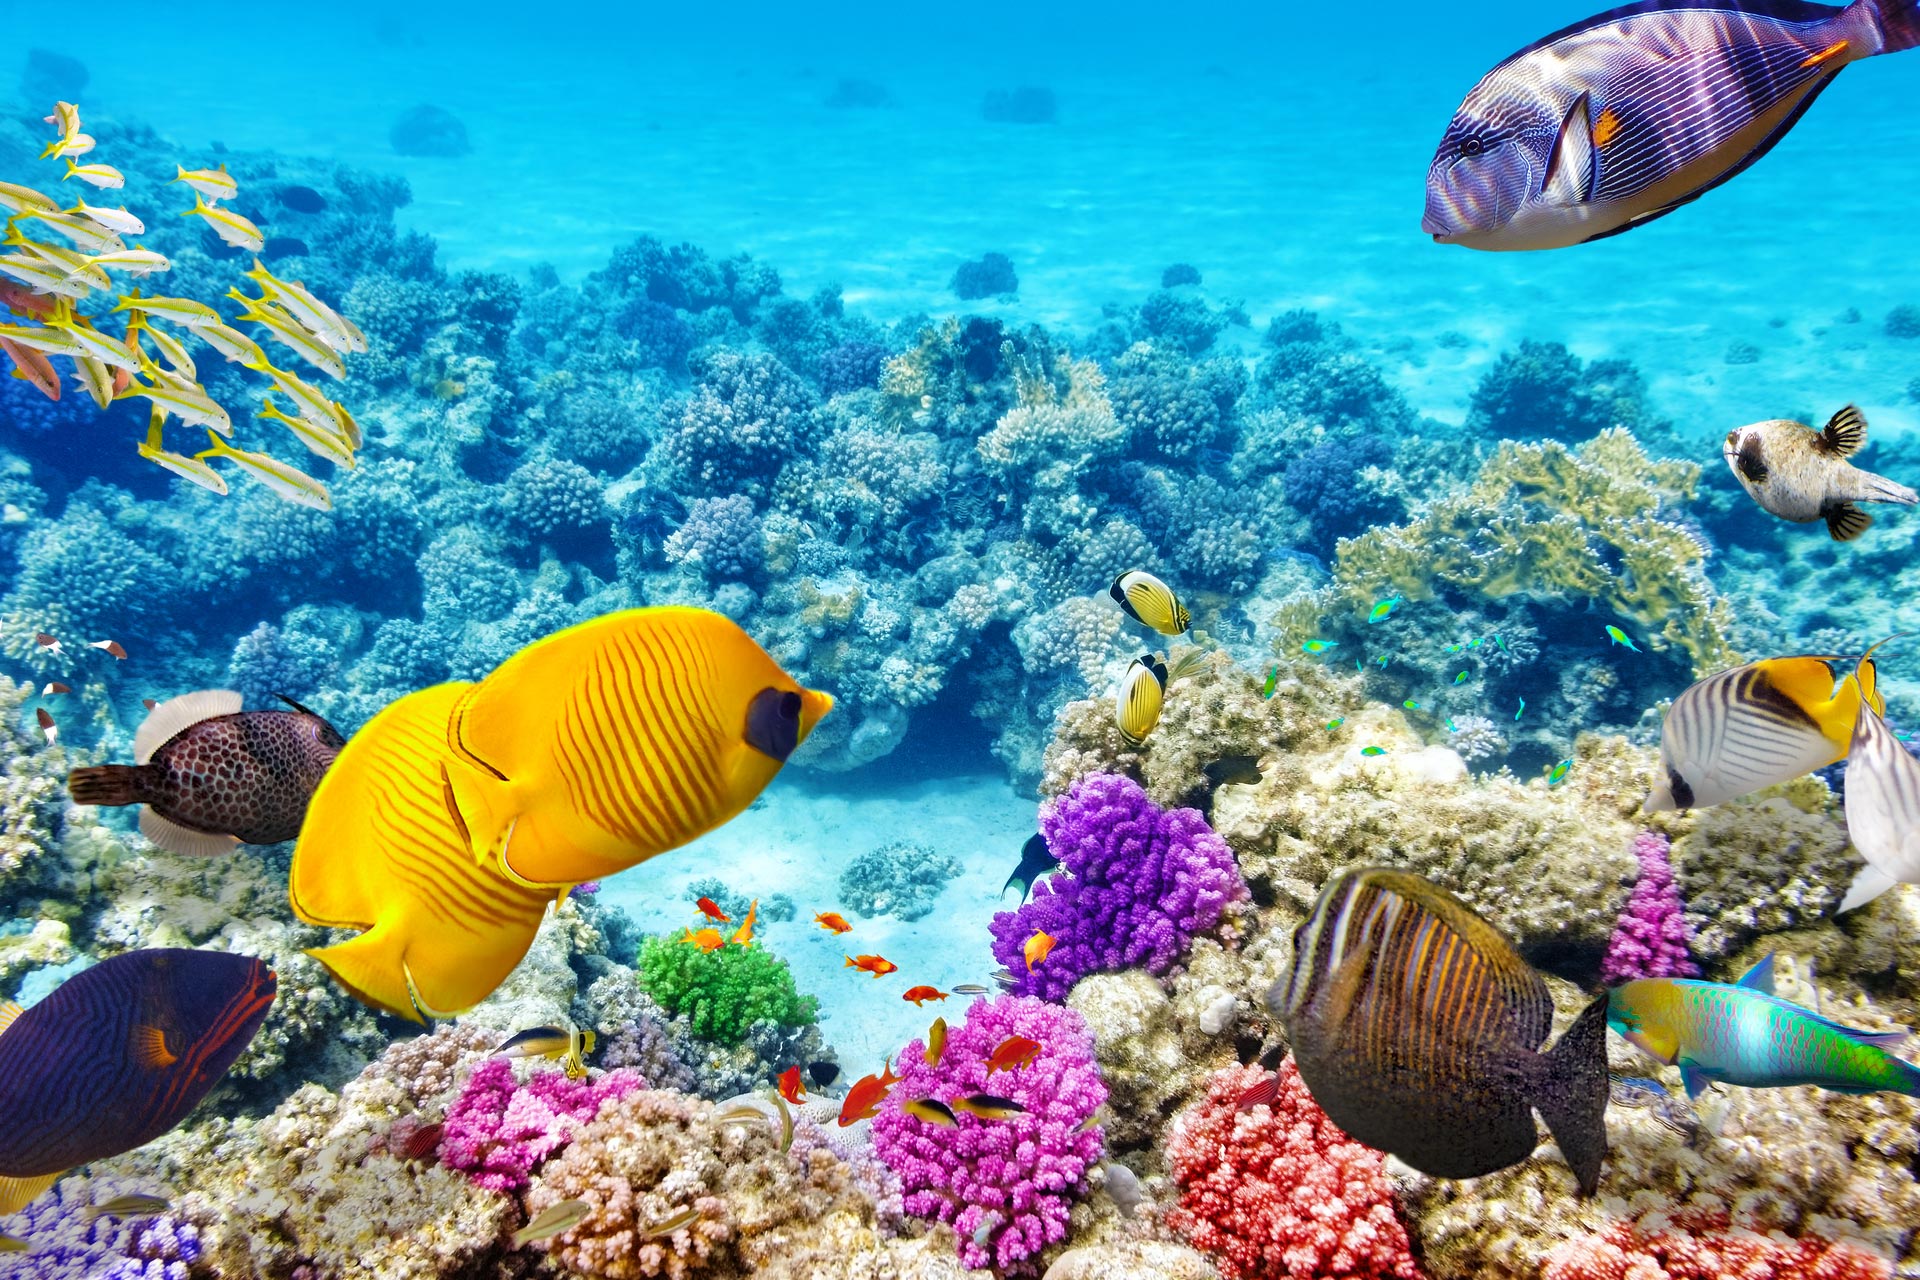 Great-Barrier-Reef-Australia. Top 10 Most Beautiful Places in the World to Visit in 2022